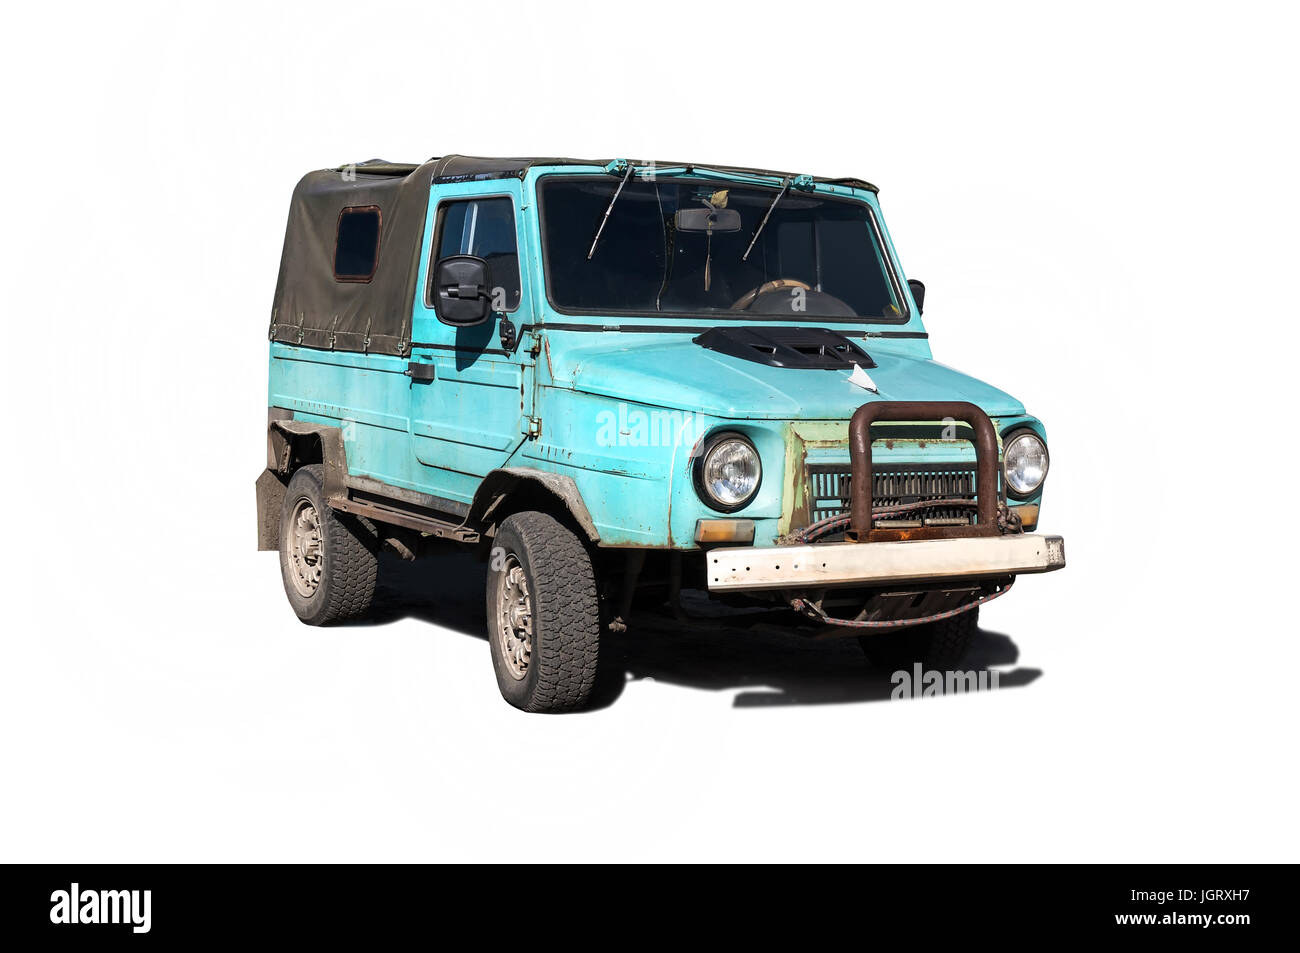 Blue subcompact Soviet old-timer car isolated on white background. Old Soviet Russian jeep Stock Photo